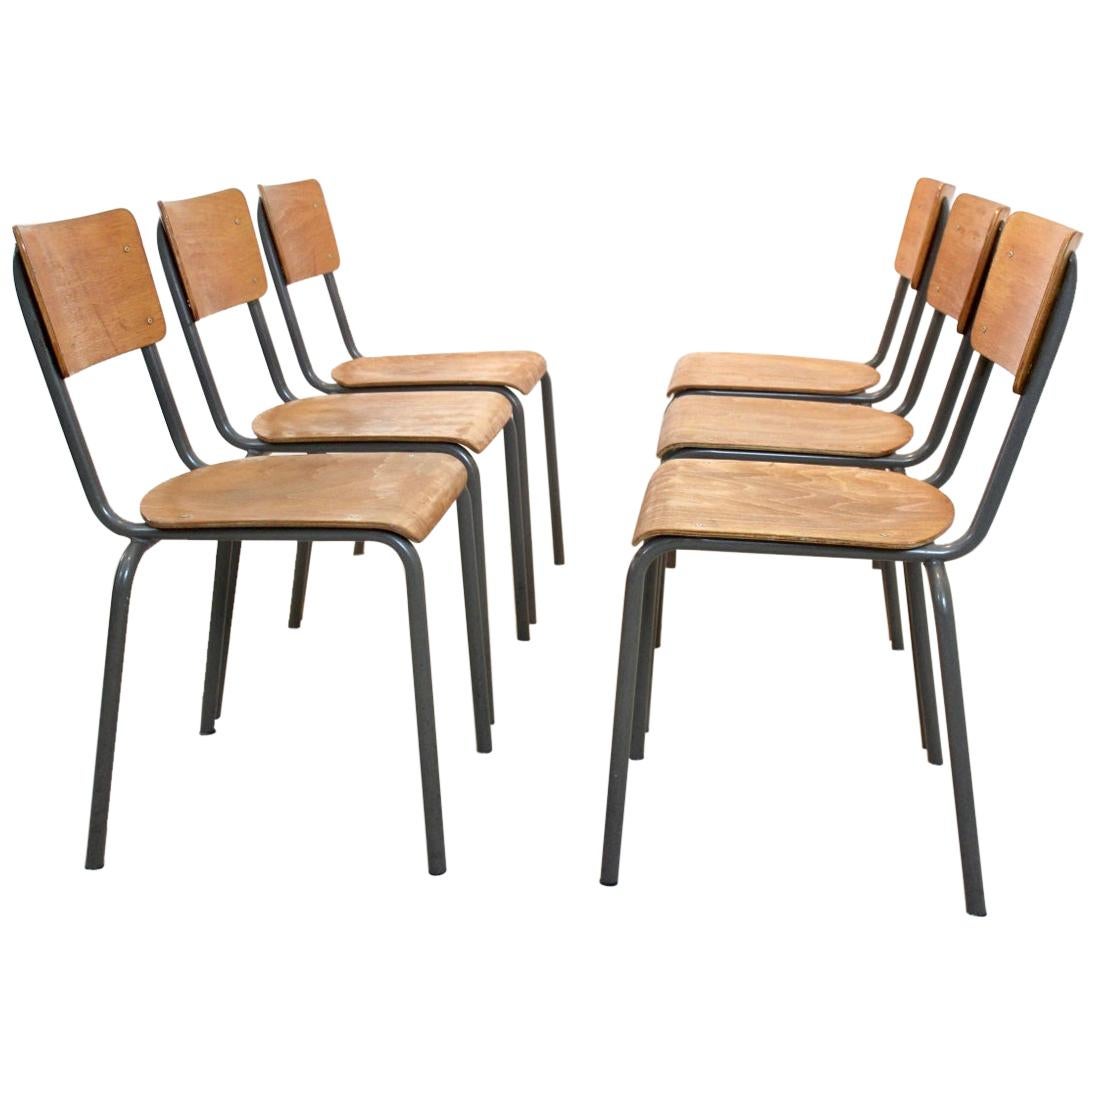 Dutch Design Industrial Plywood Chairs, 1960s For Sale